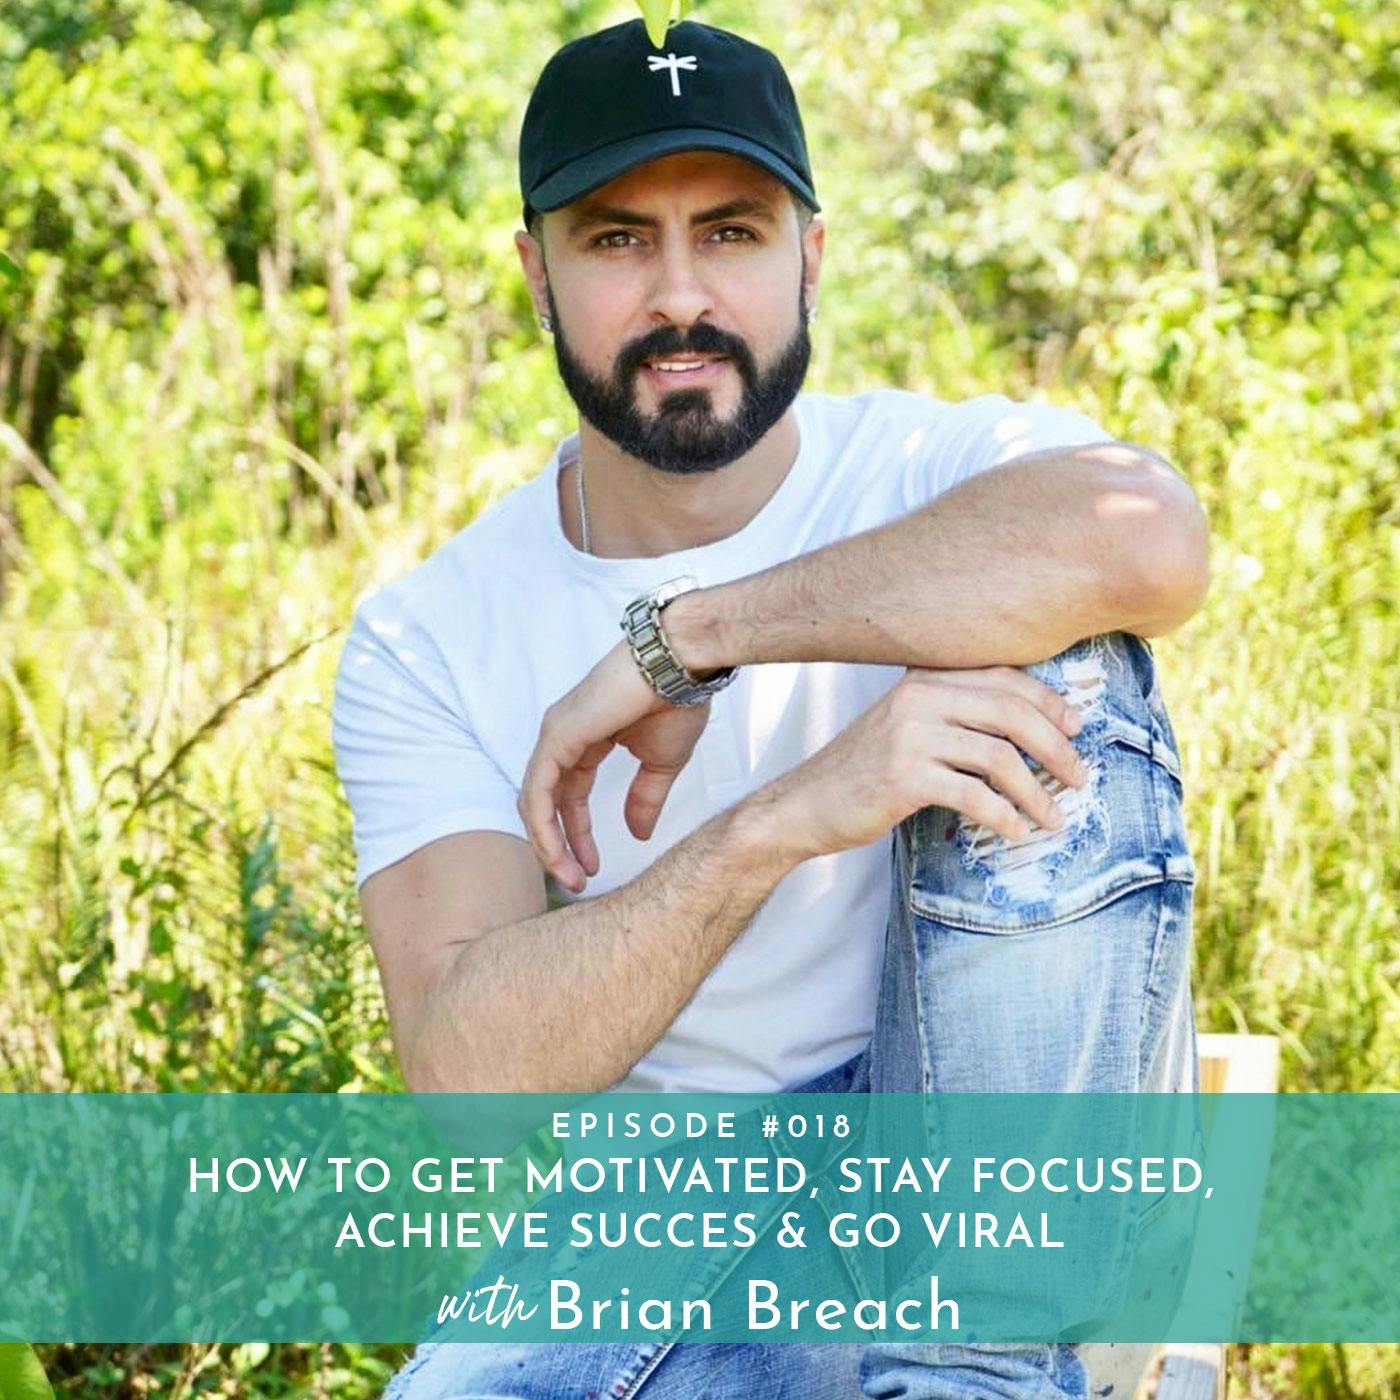 How to Get Motivated, Stay Focused, Achieve Success and Go Viral with Brian Breach